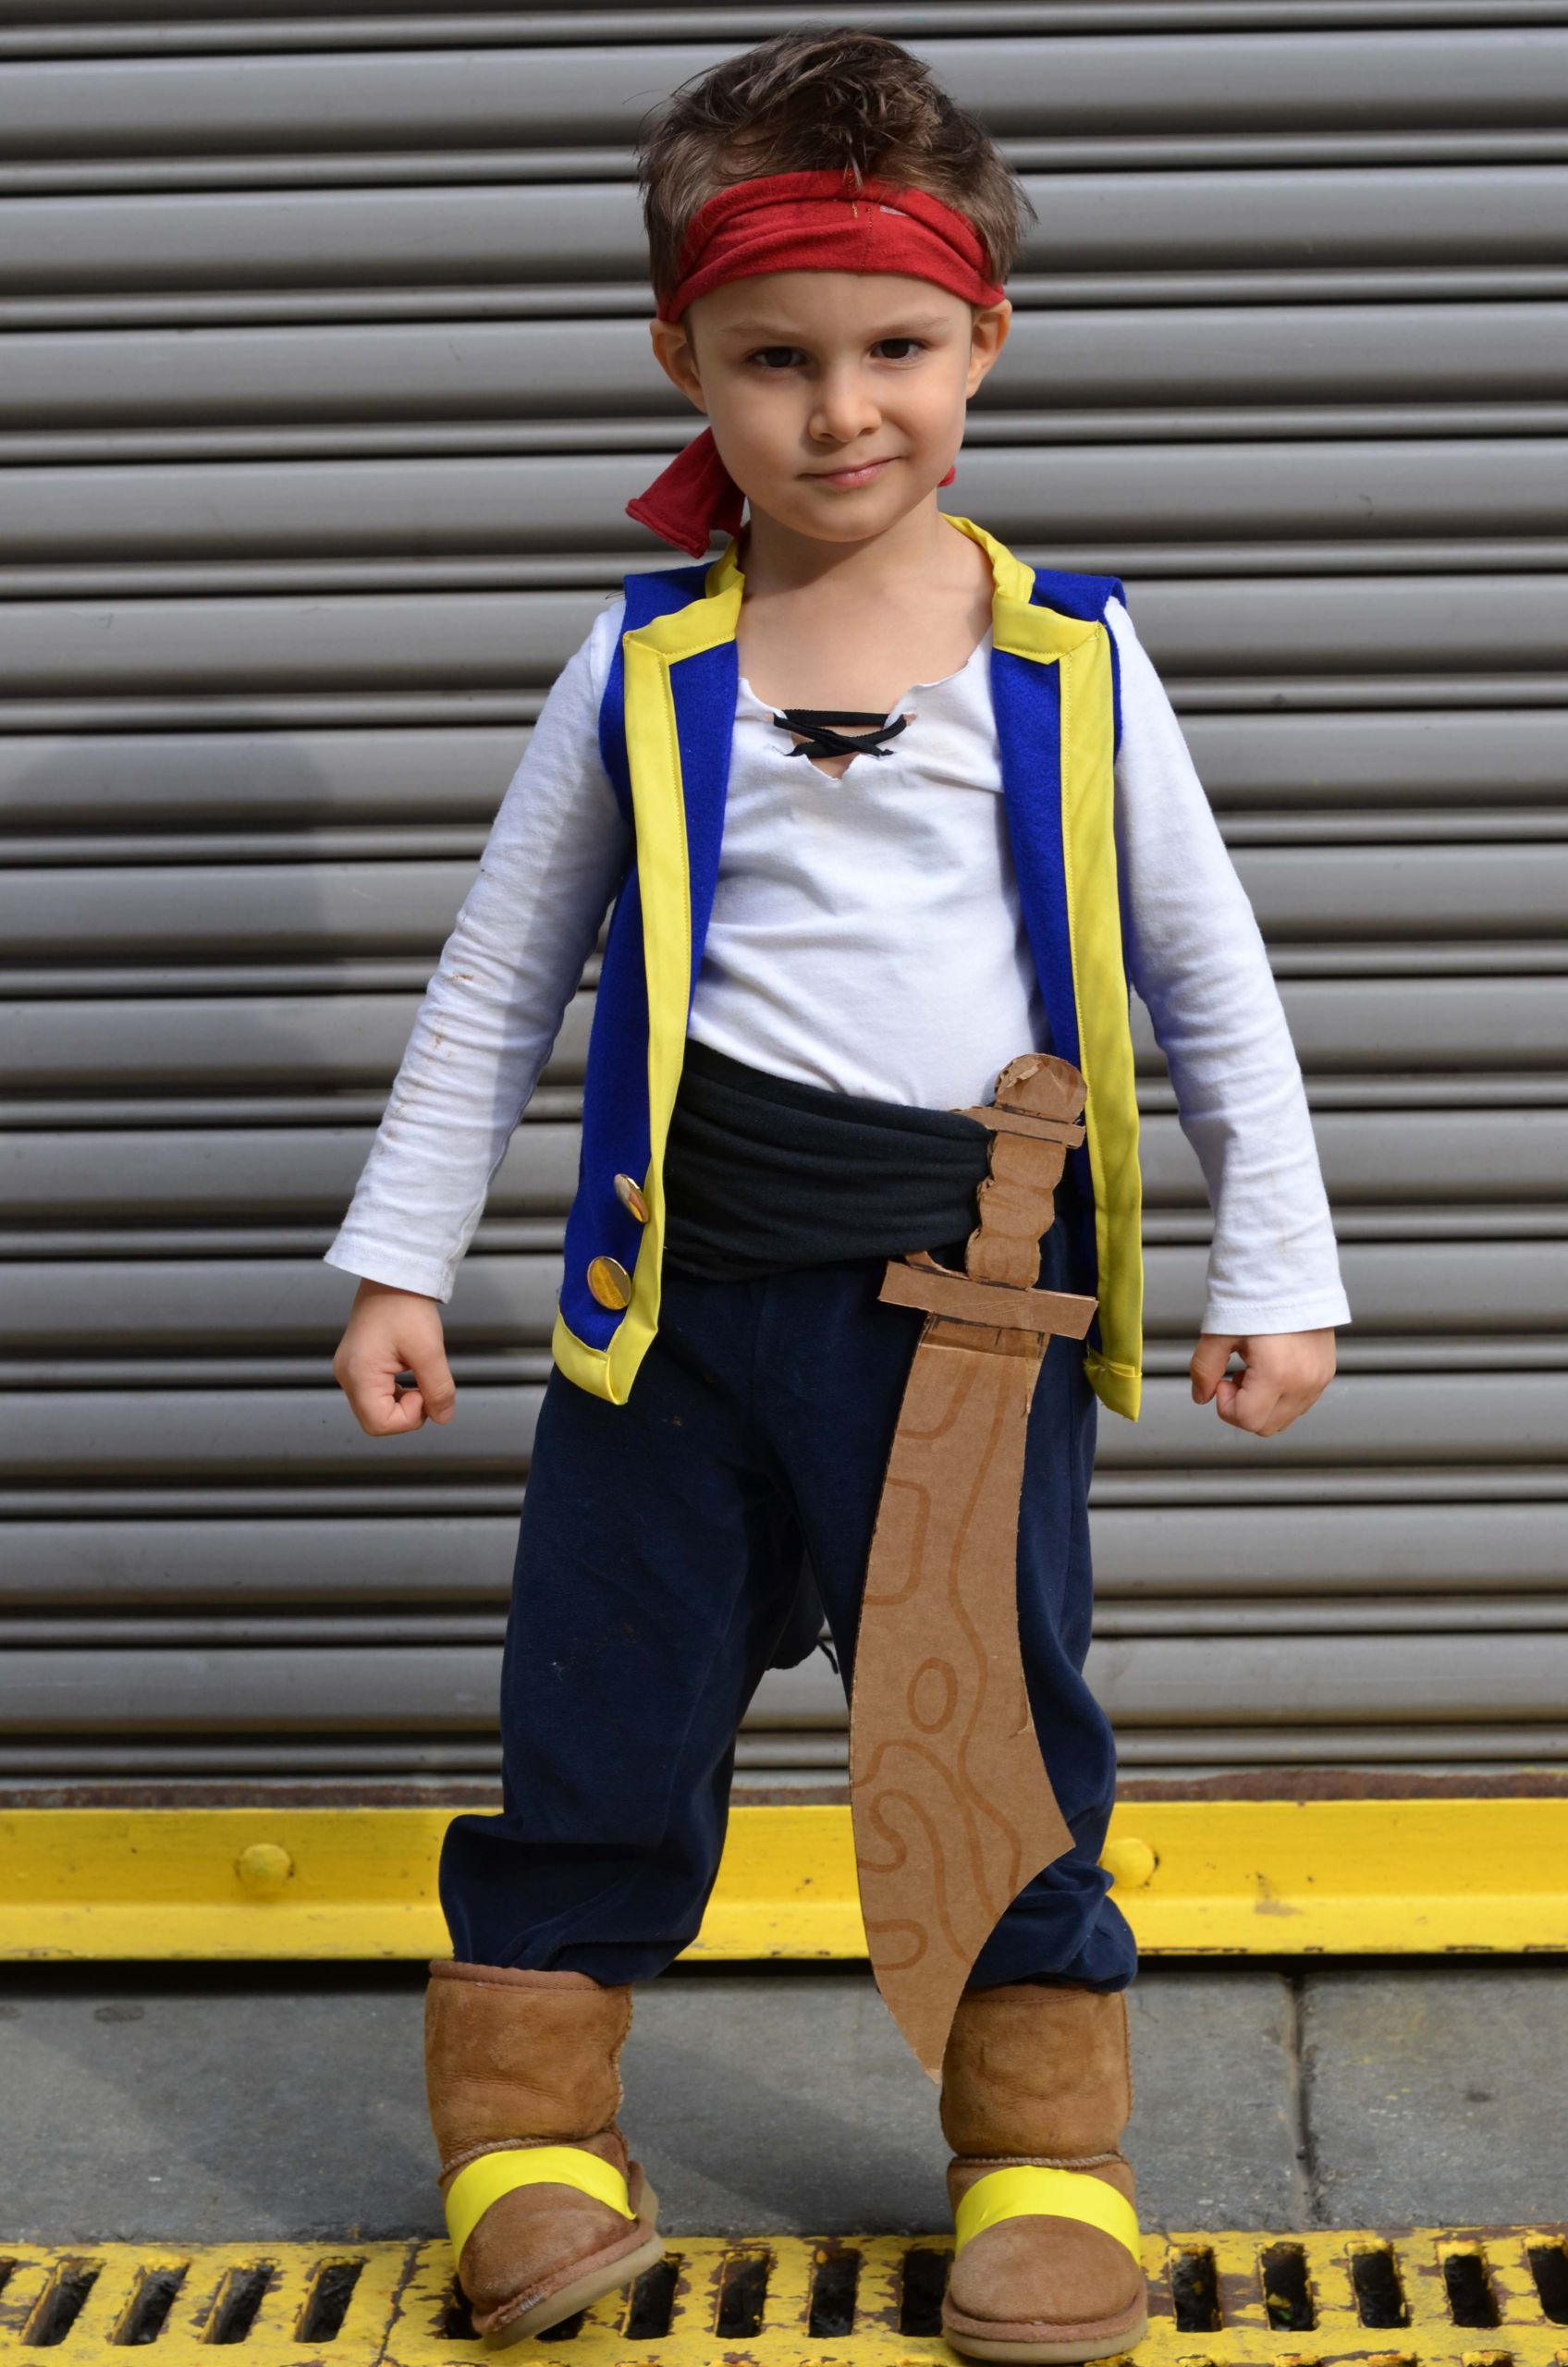 DIY Pirate Costumes For Kids
 DIY Halloween Costumes for Kids